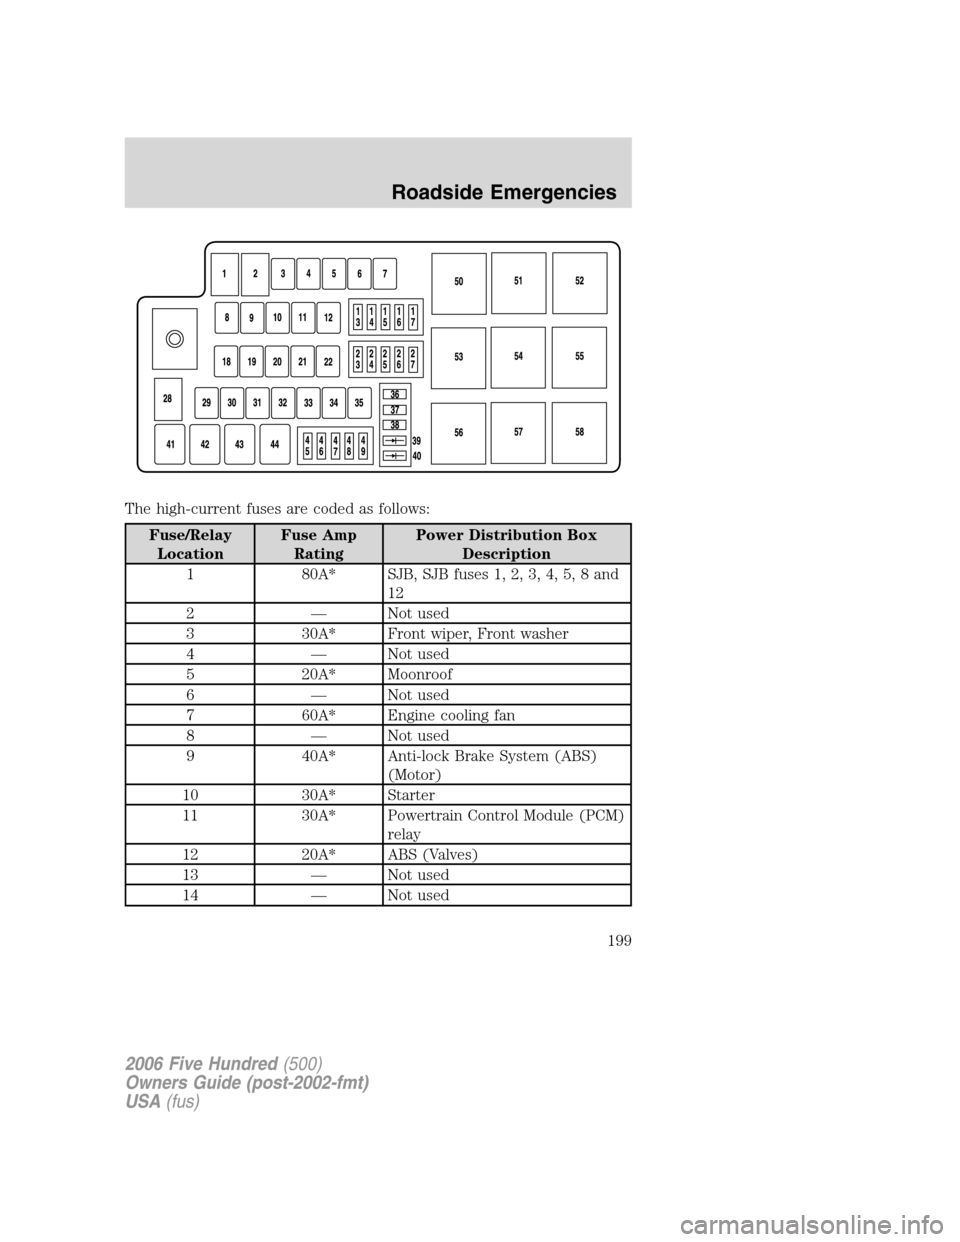 FORD FIVE HUNDRED 2006 D258 / 1.G Owners Manual The high-current fuses are coded as follows:
Fuse/Relay
LocationFuse Amp
RatingPower Distribution Box
Description
1 80A* SJB, SJB fuses 1, 2, 3, 4, 5, 8 and
12
2 — Not used
3 30A* Front wiper, Front